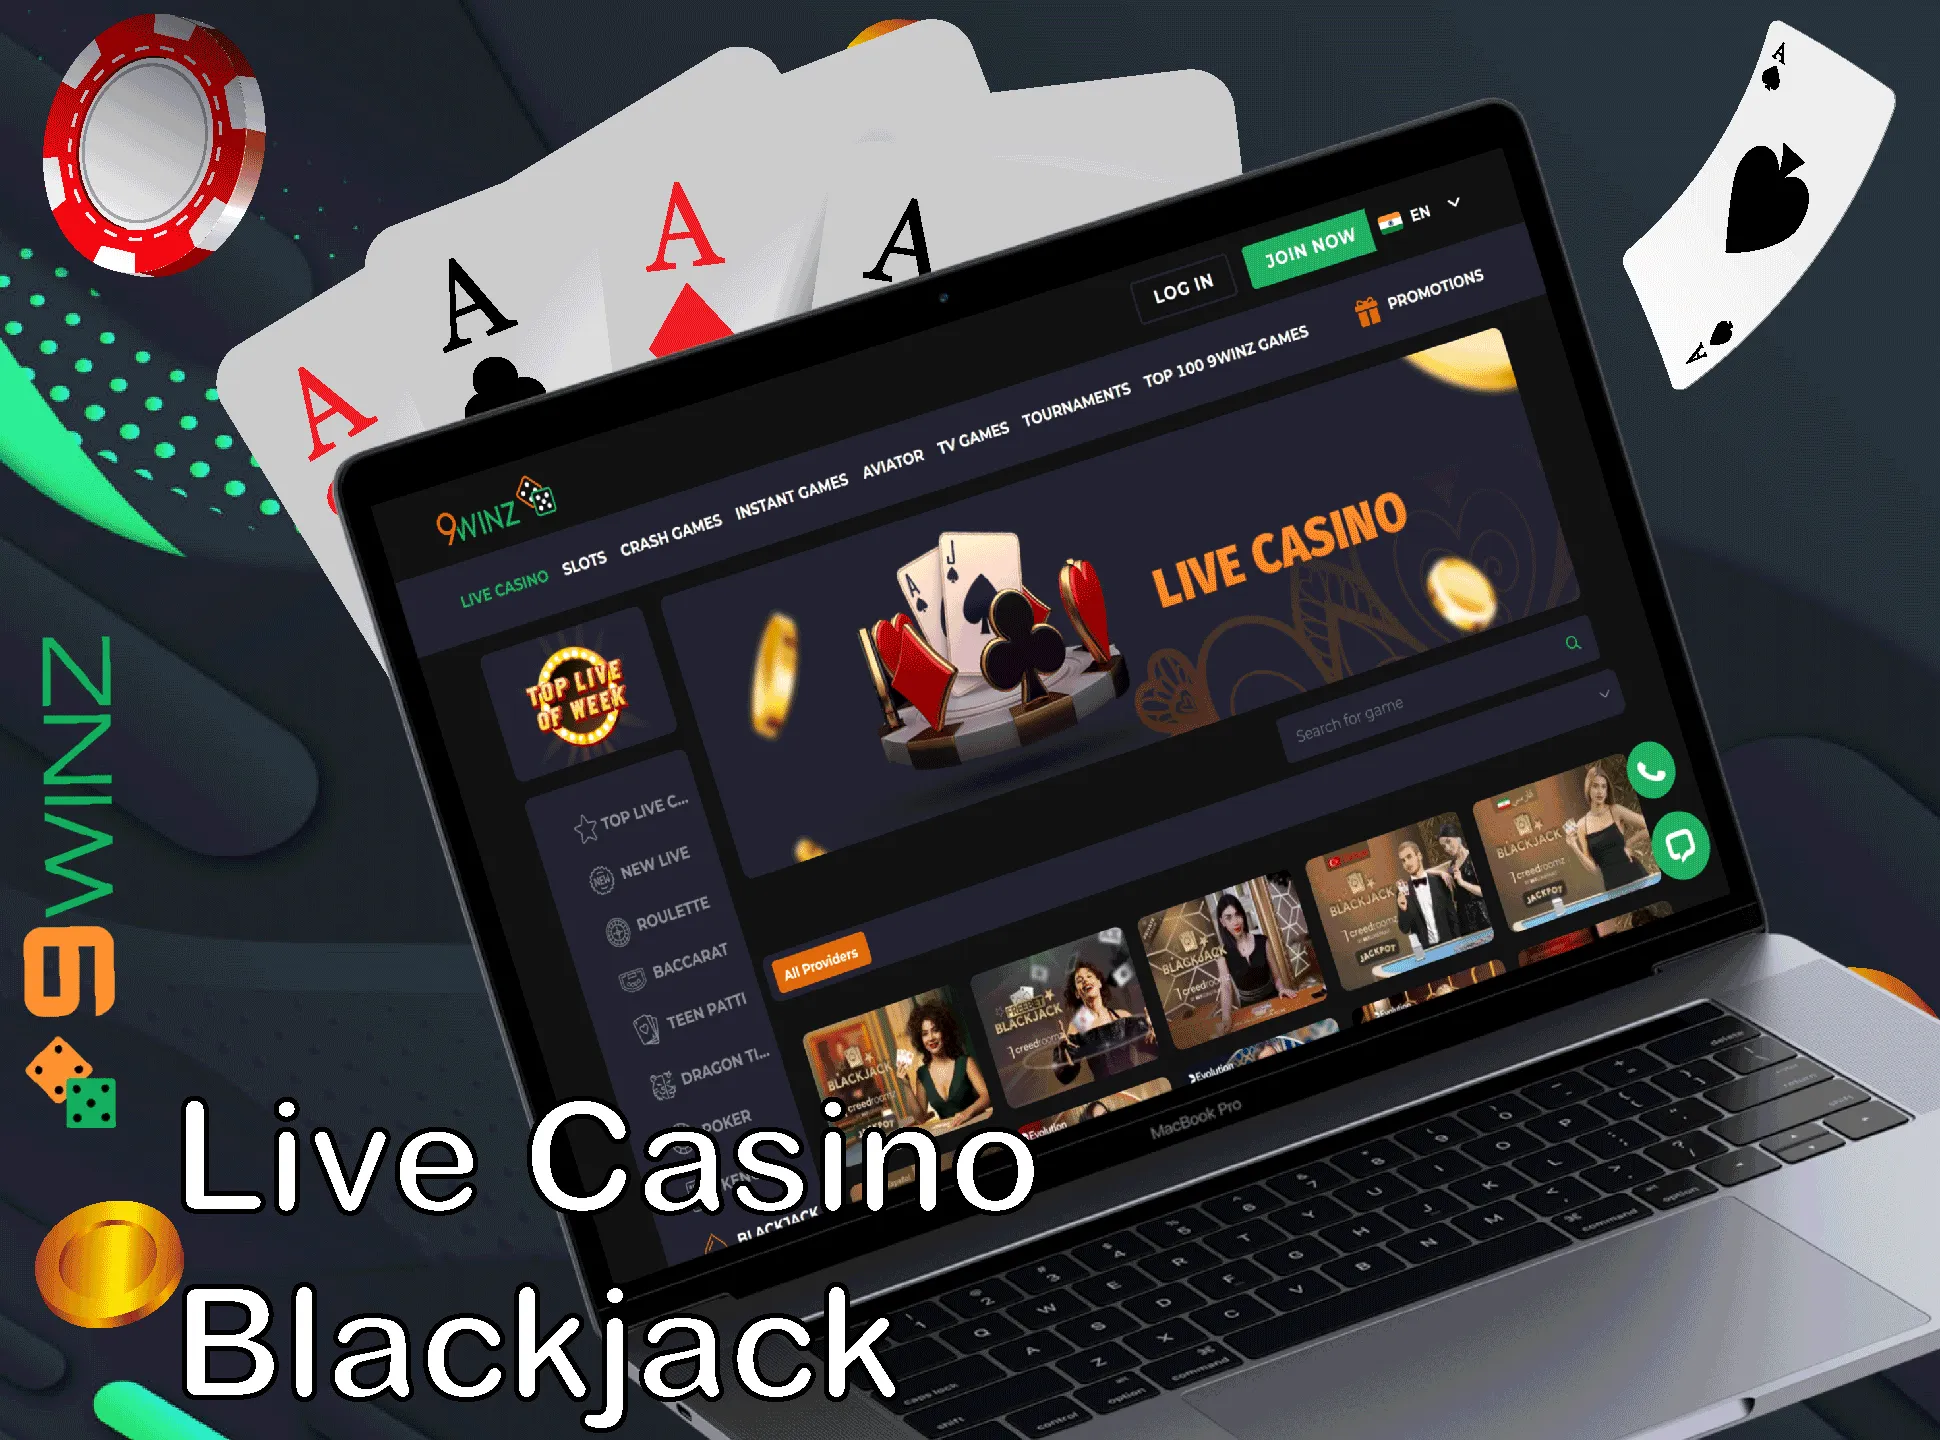 Play blackjack in live format with real people at the 9winz casino.